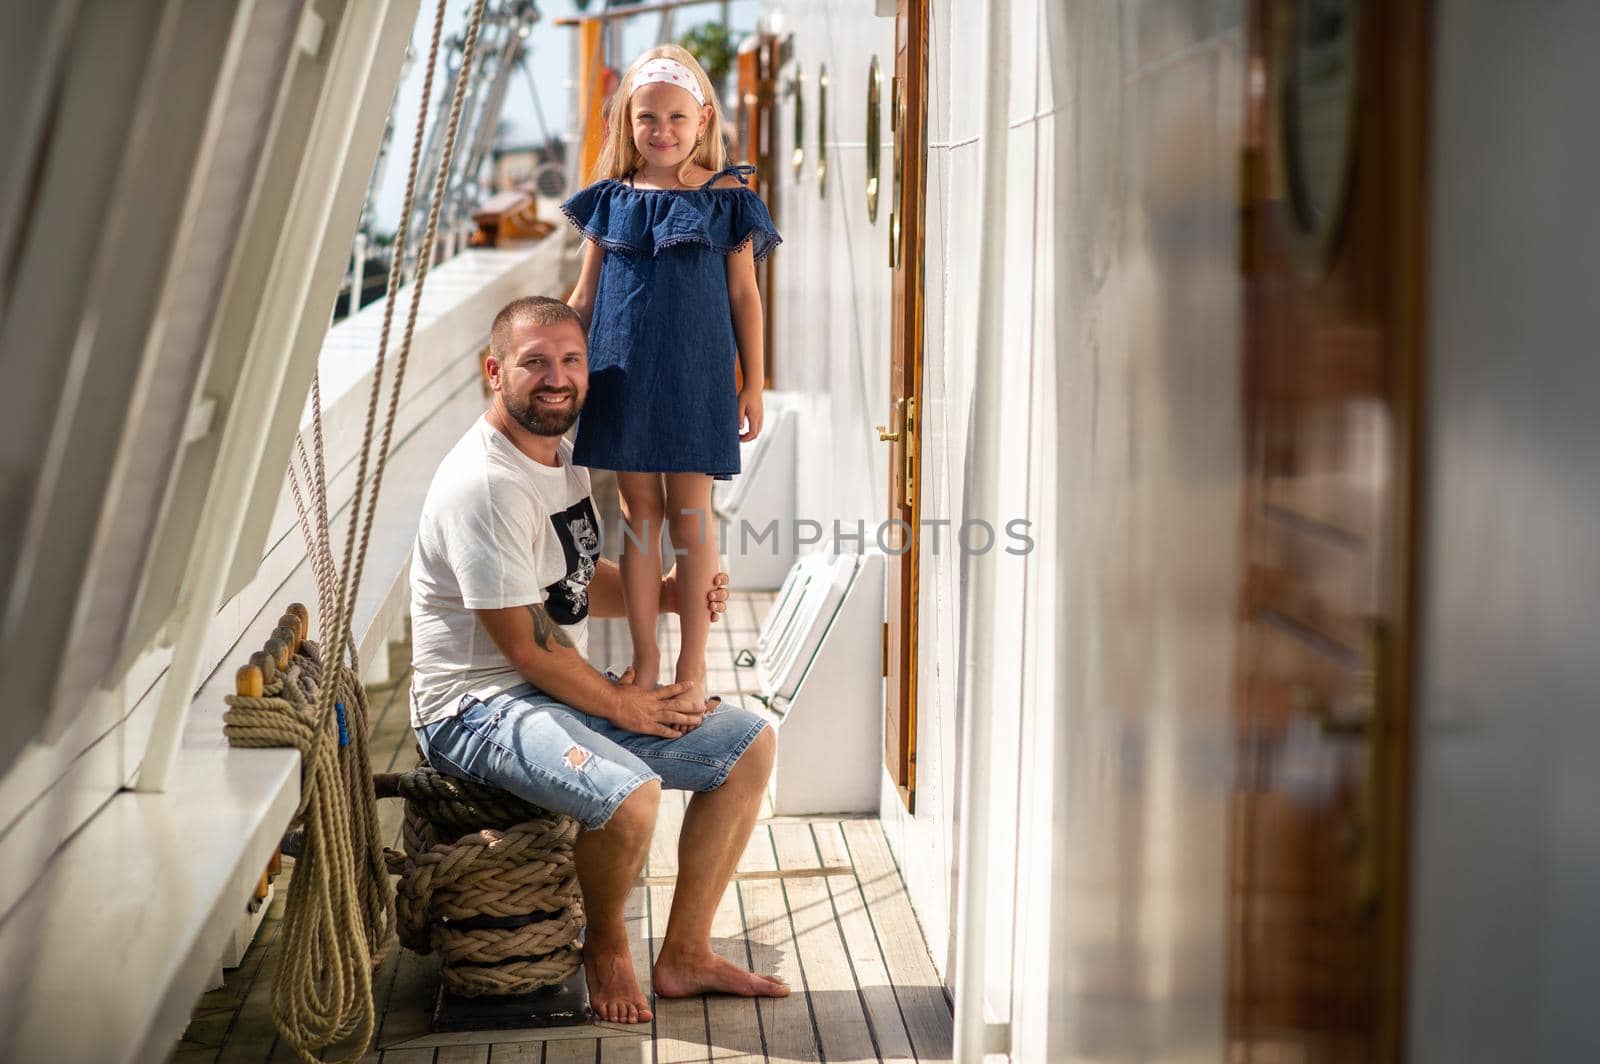 A little girl sits in the arms of a man on the deck of a large sailing ship in the city of Klaipeda, Lithuania